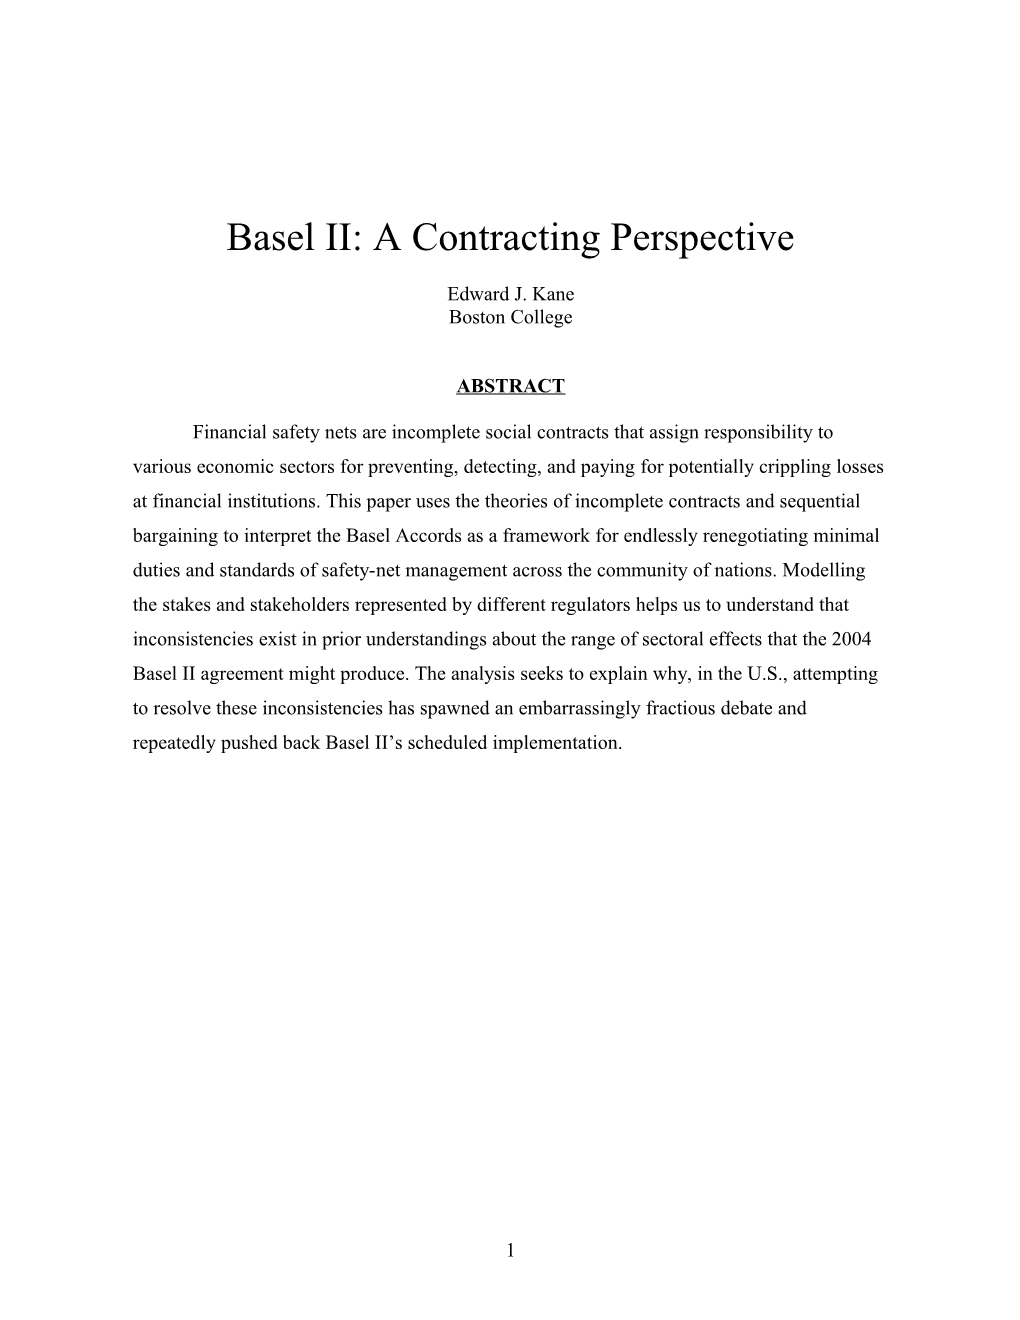 Basel II: a Contracting Perspective